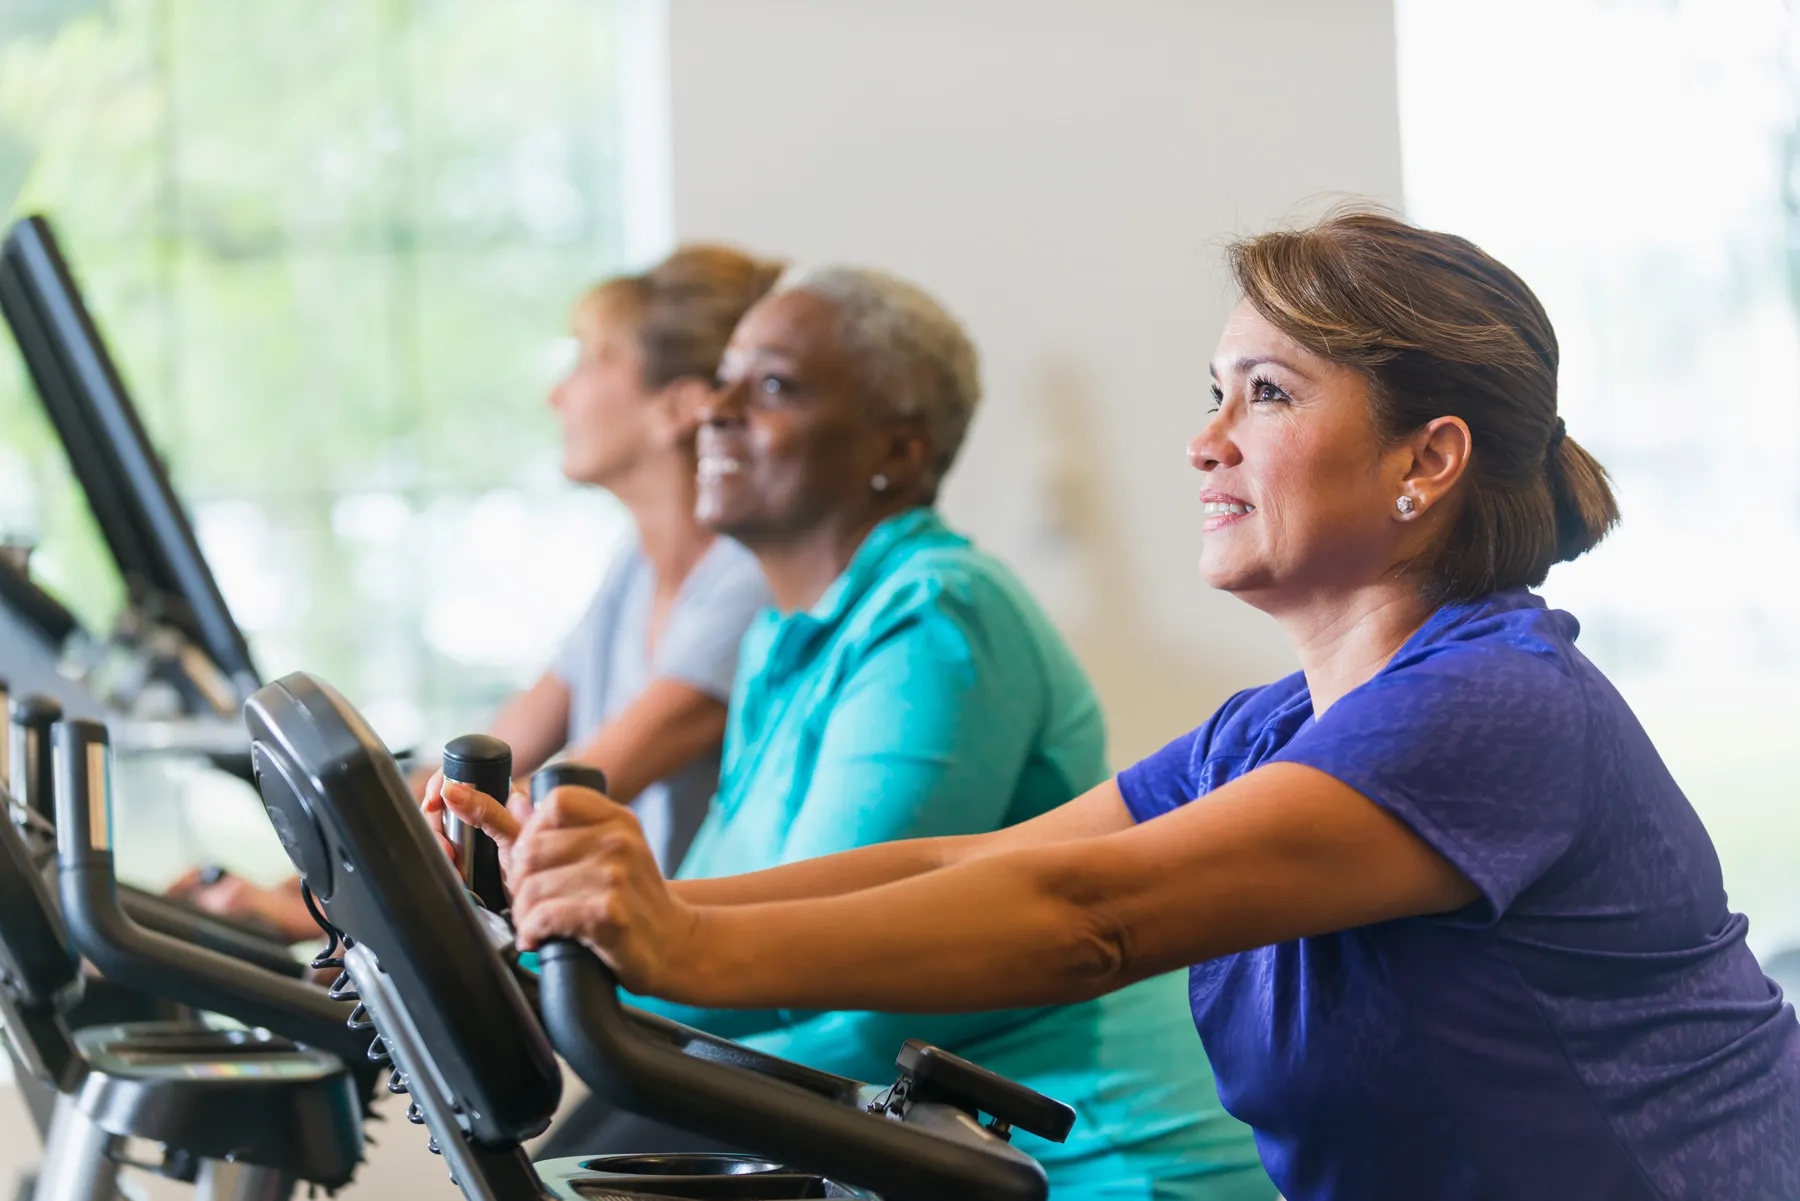 Adding 20 Minutes Daily Exercise Cuts Hospital Stays, Study Shows